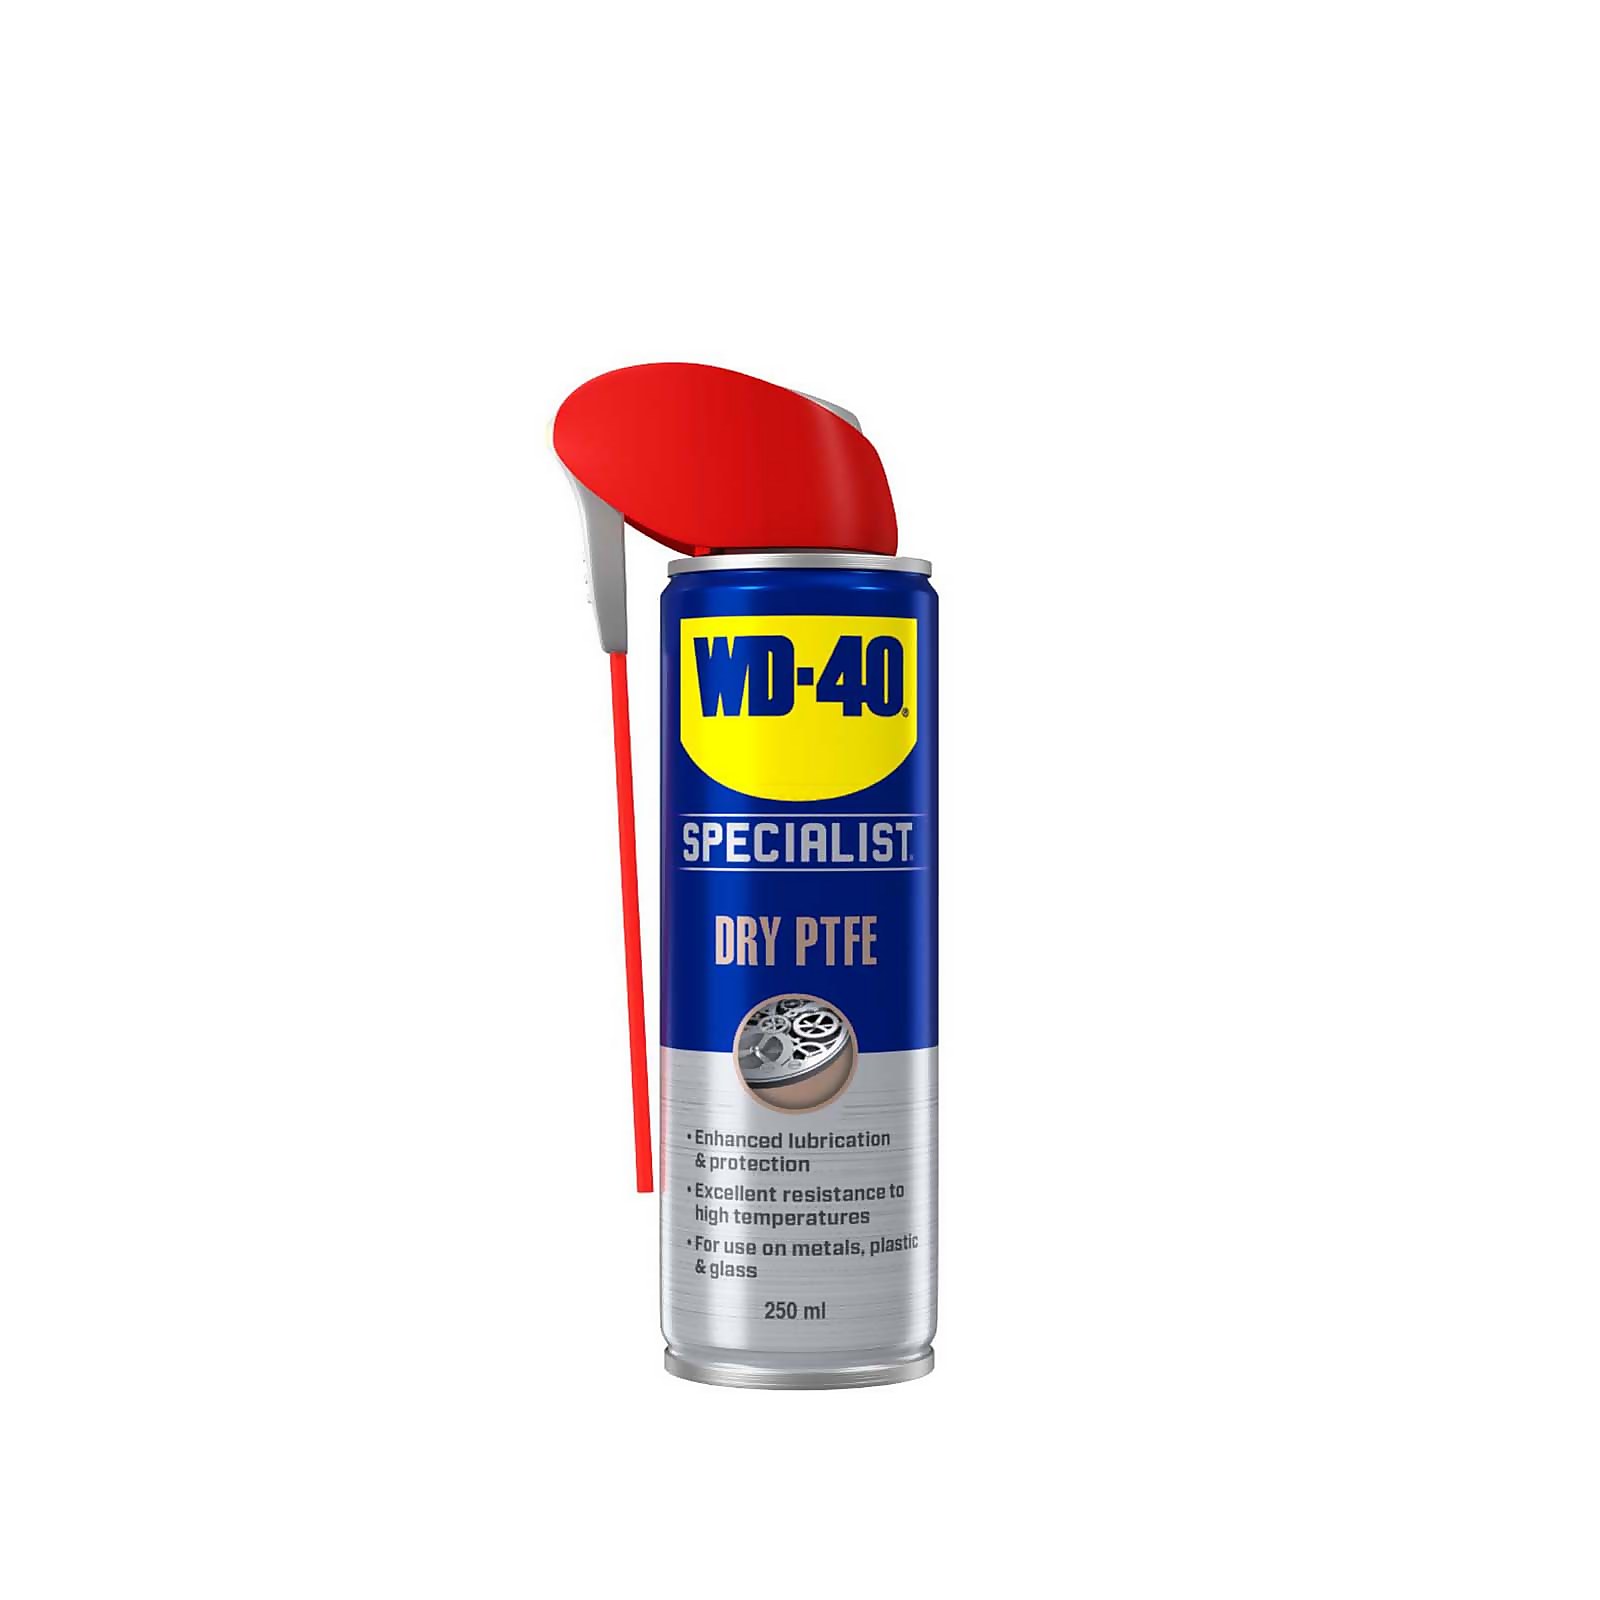 Photo of Wd-40 Specialist Anti Friction Dry Ptfe Lubricant - 250ml